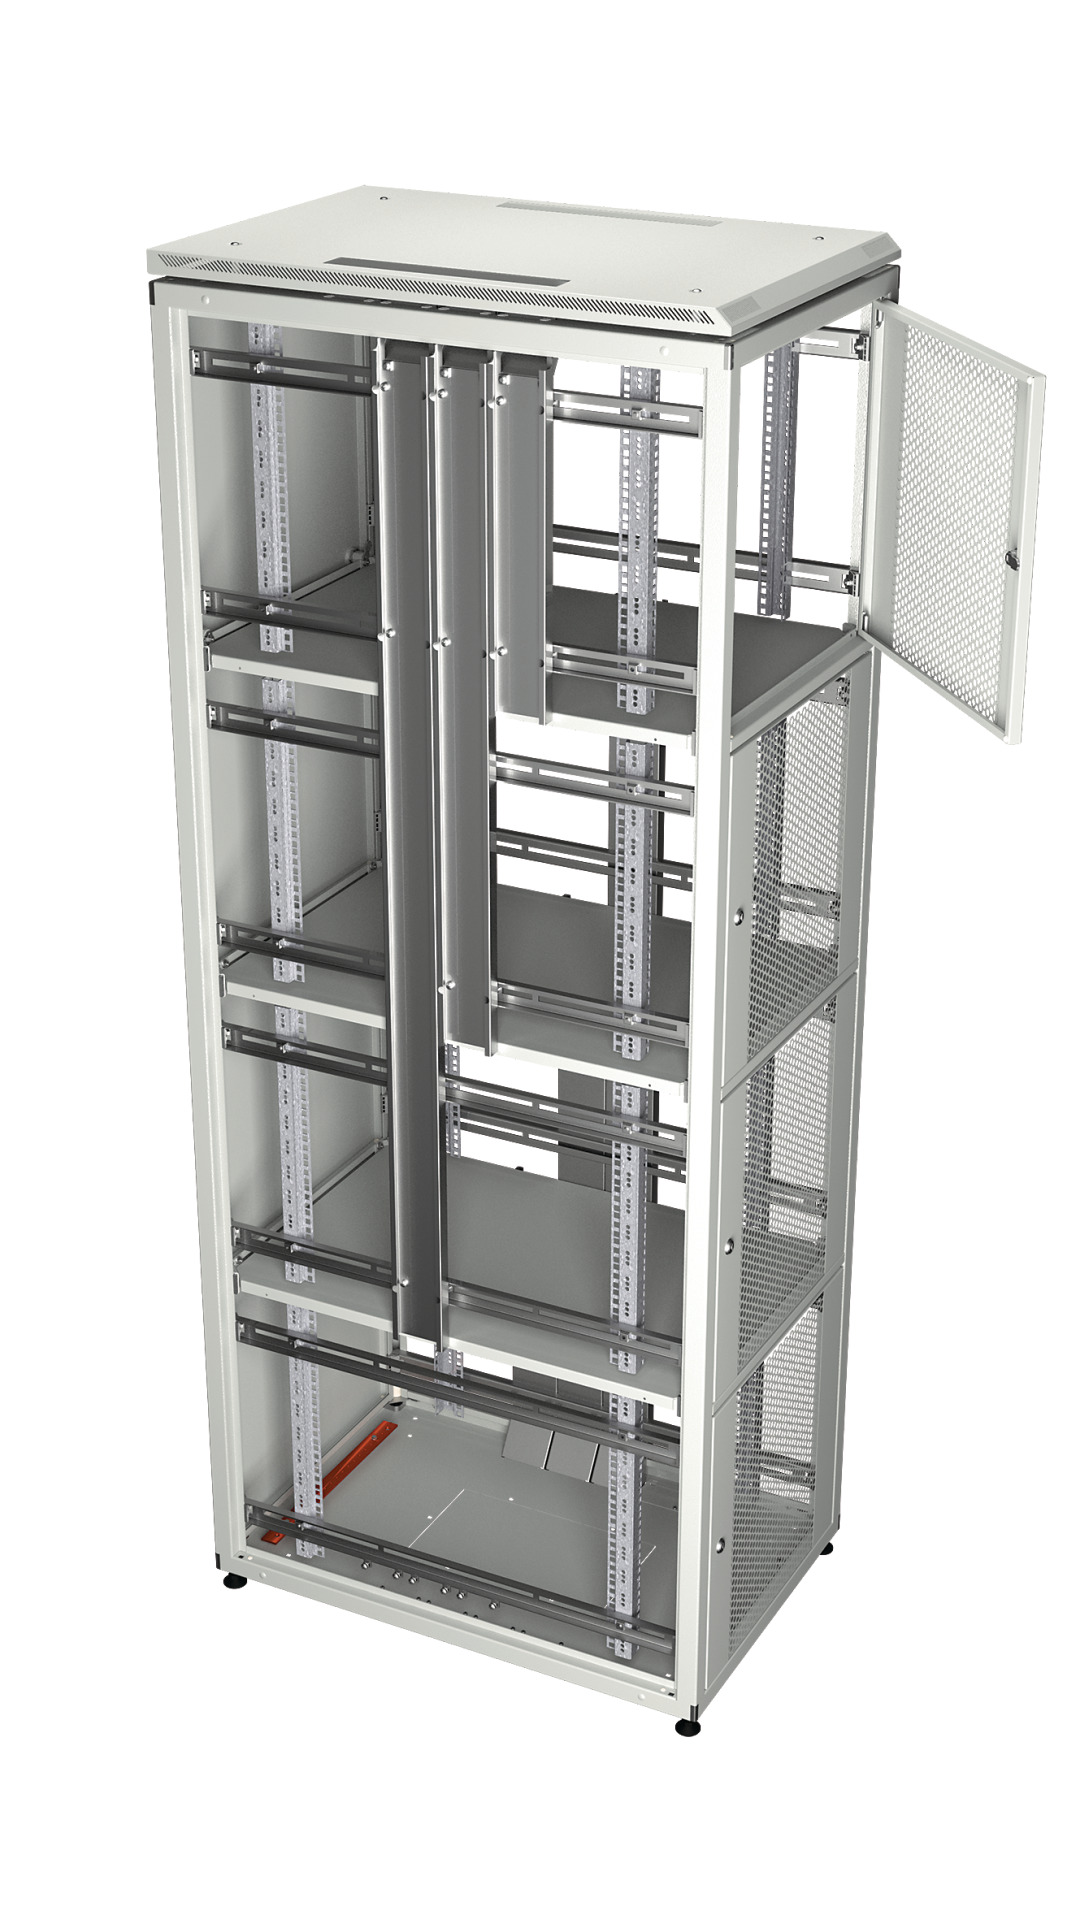 Co-Location Rack PRO, 2 x 23U, 600x1000 mm, F+R 1-Part Perforated, RAL7035